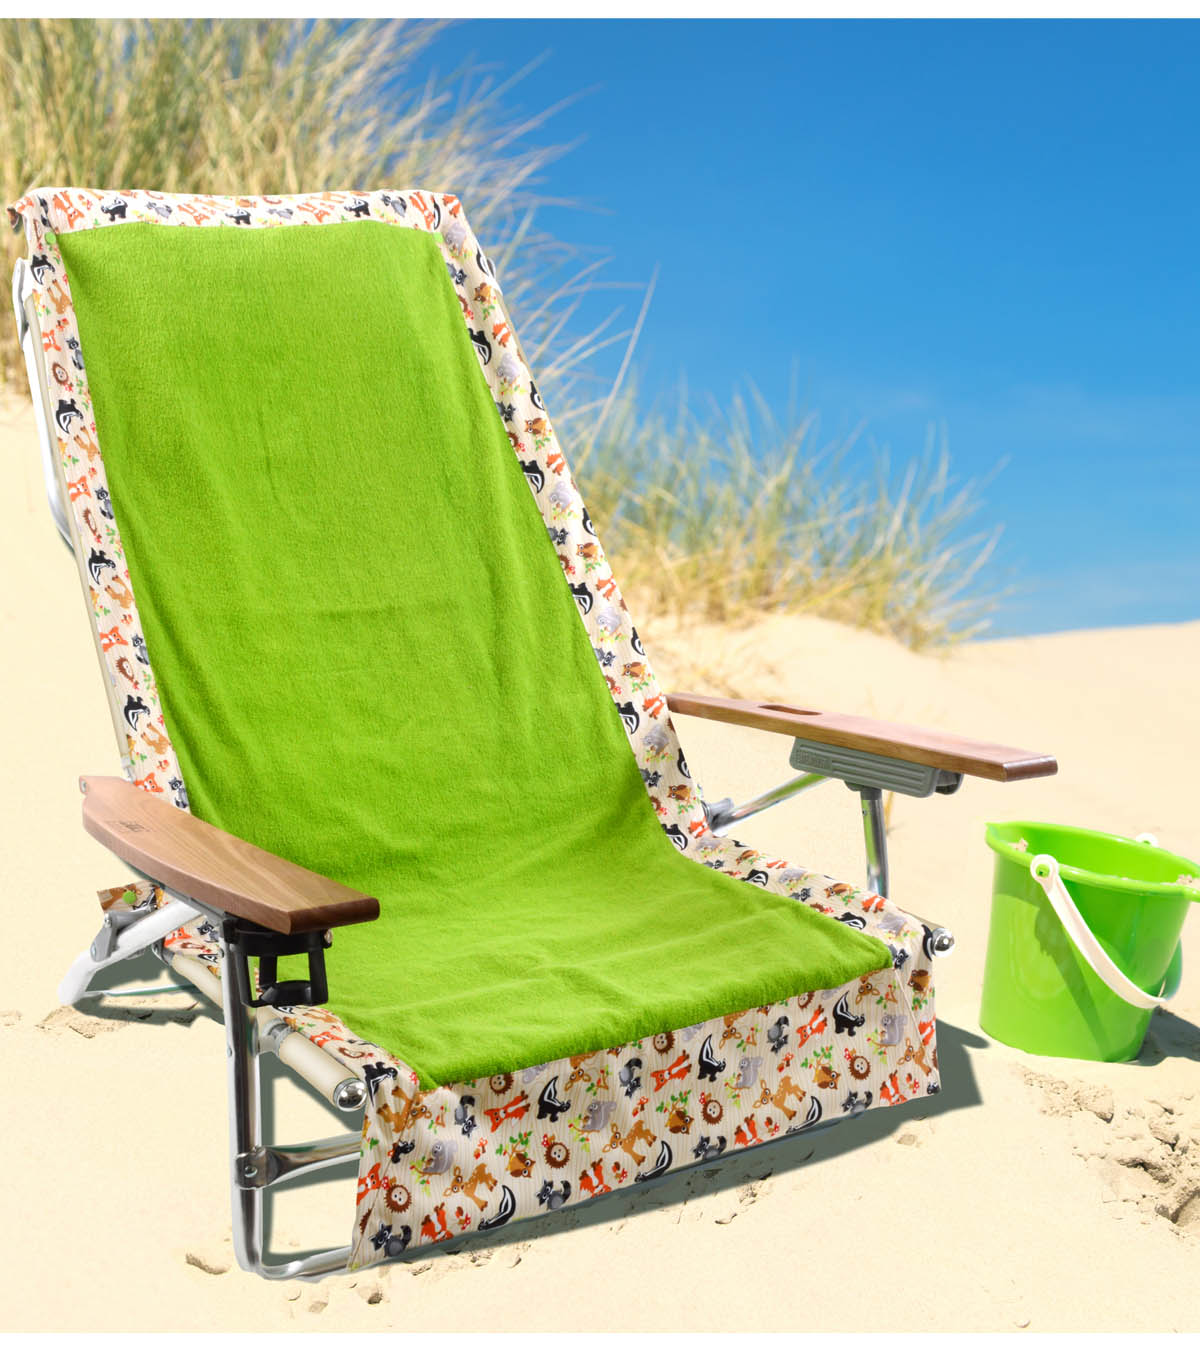 Creatice Beach Chair Cover Up for Simple Design